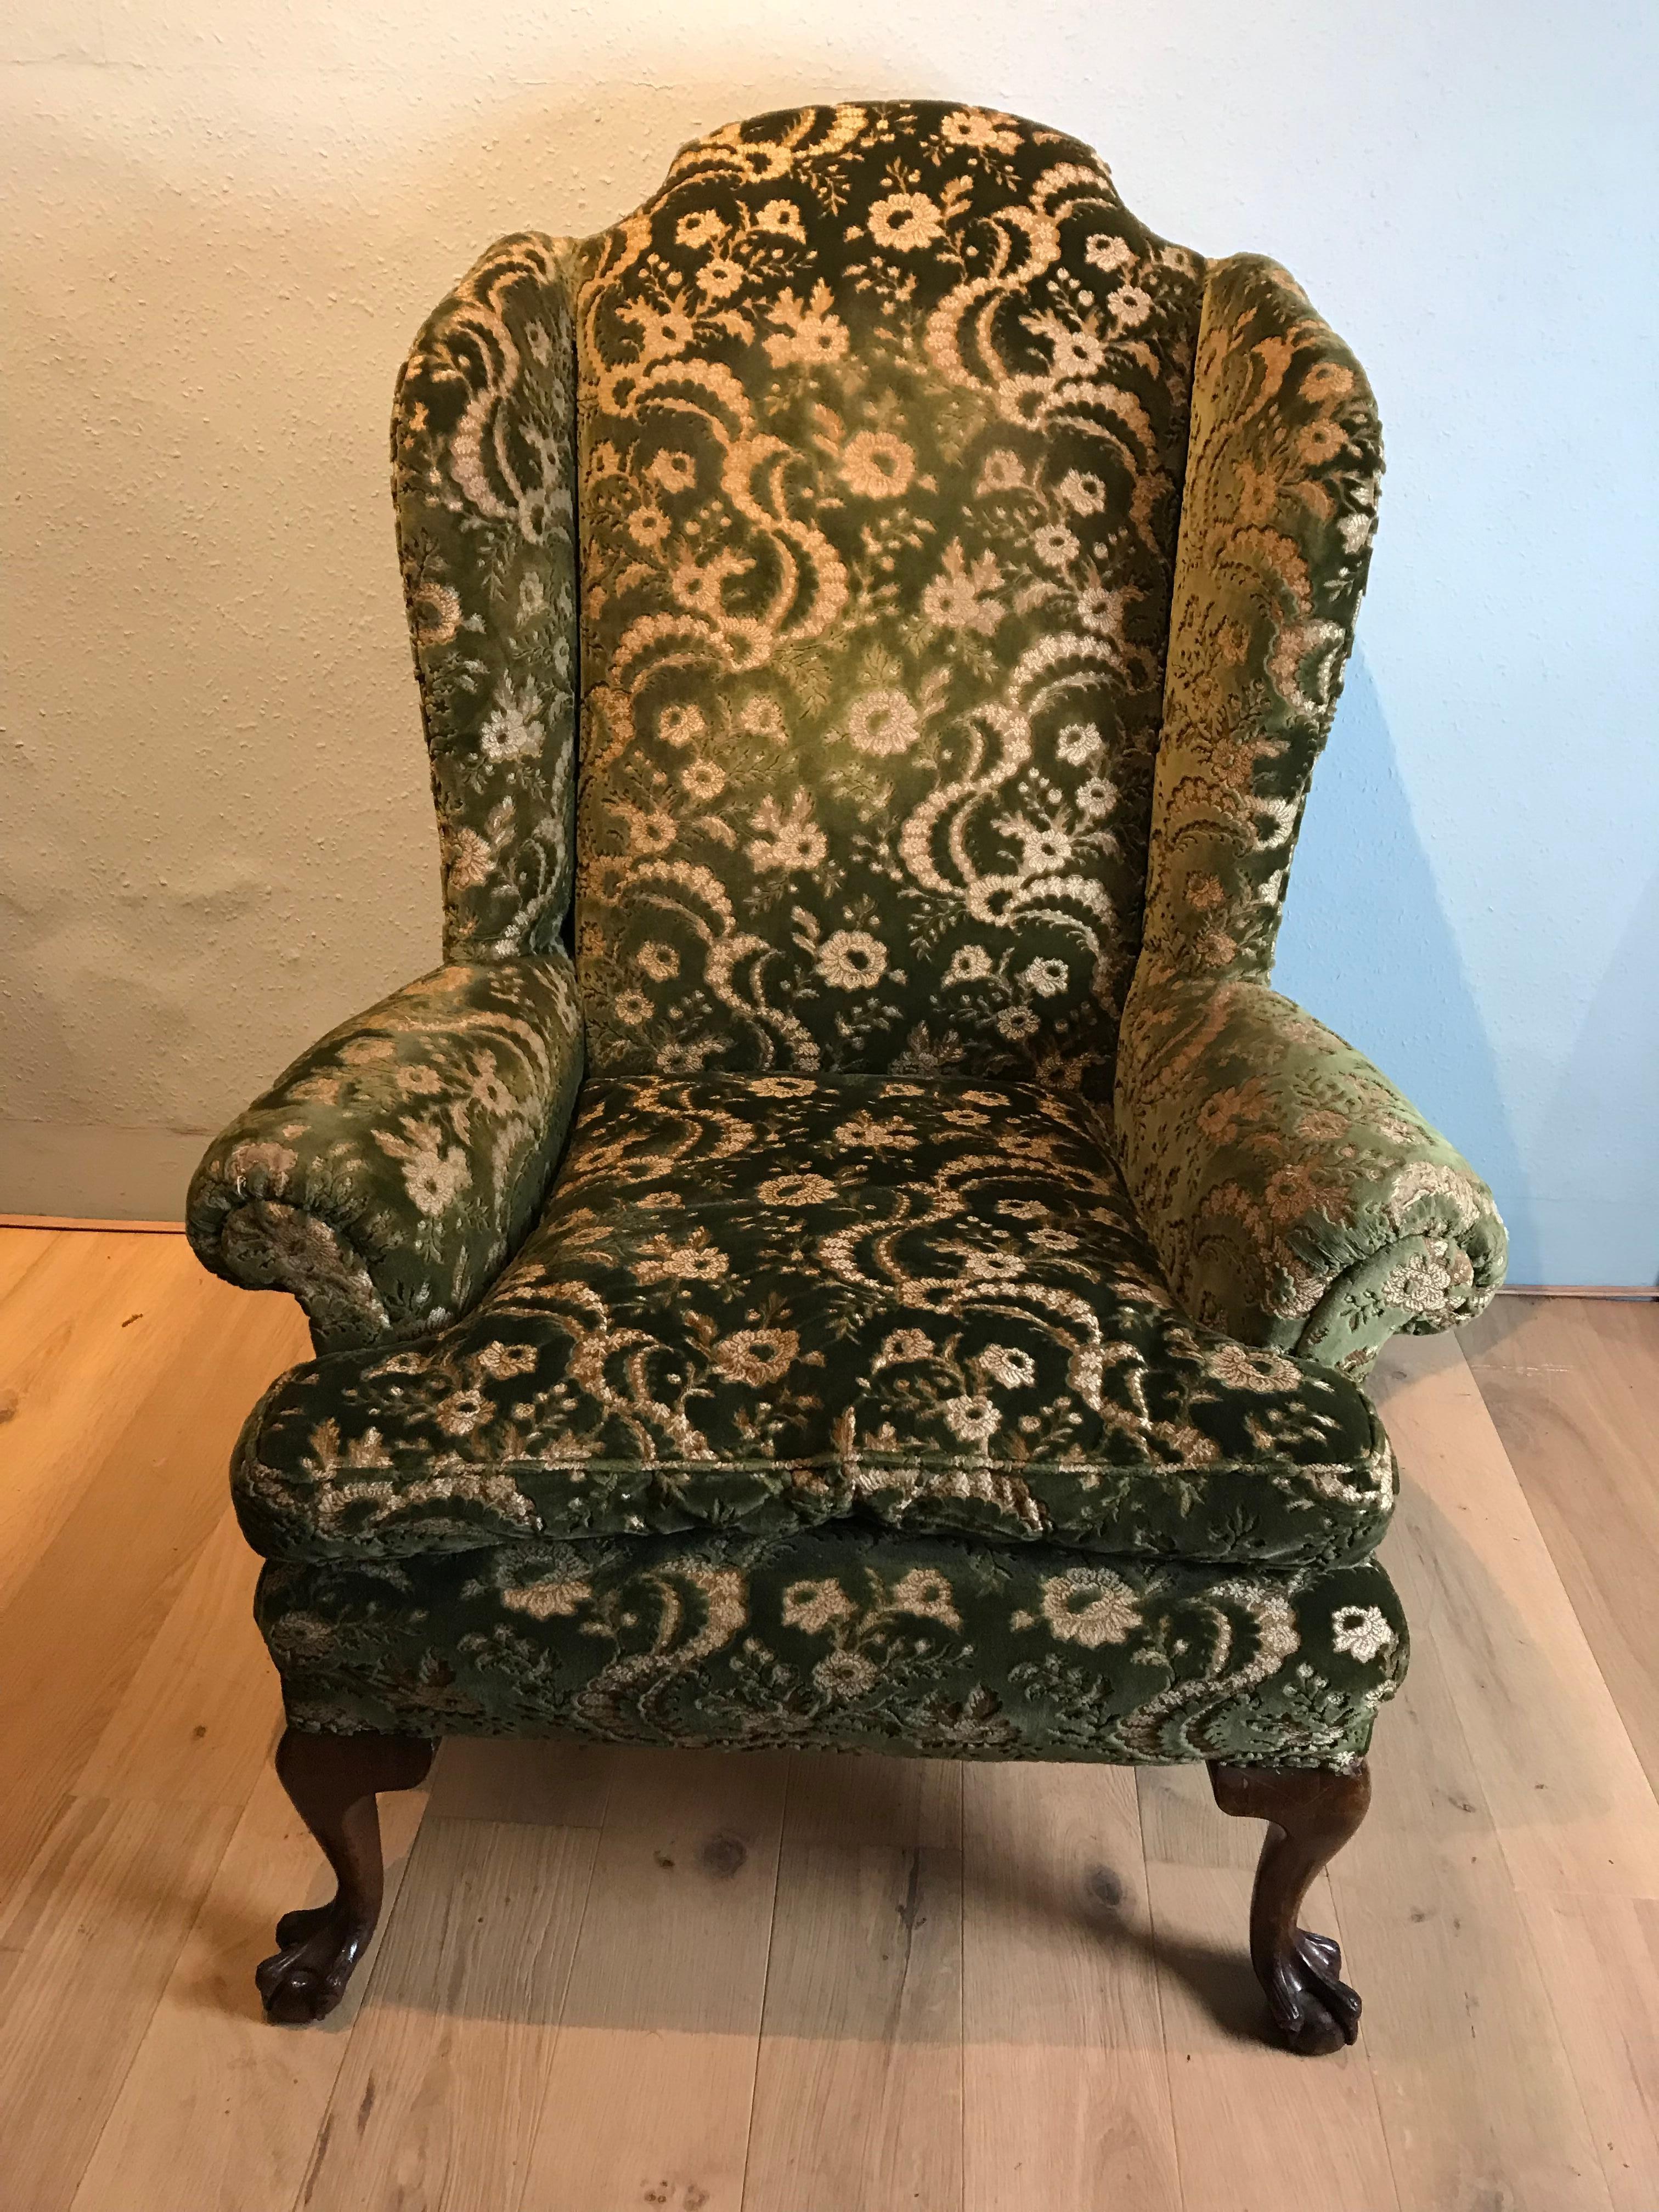 Country house Queen Anne style walnut armchair of large scale in very good condition with elegant scroll top cresting rail and arms resting on boldly carved ball and claw cabriole legs circa 1900.